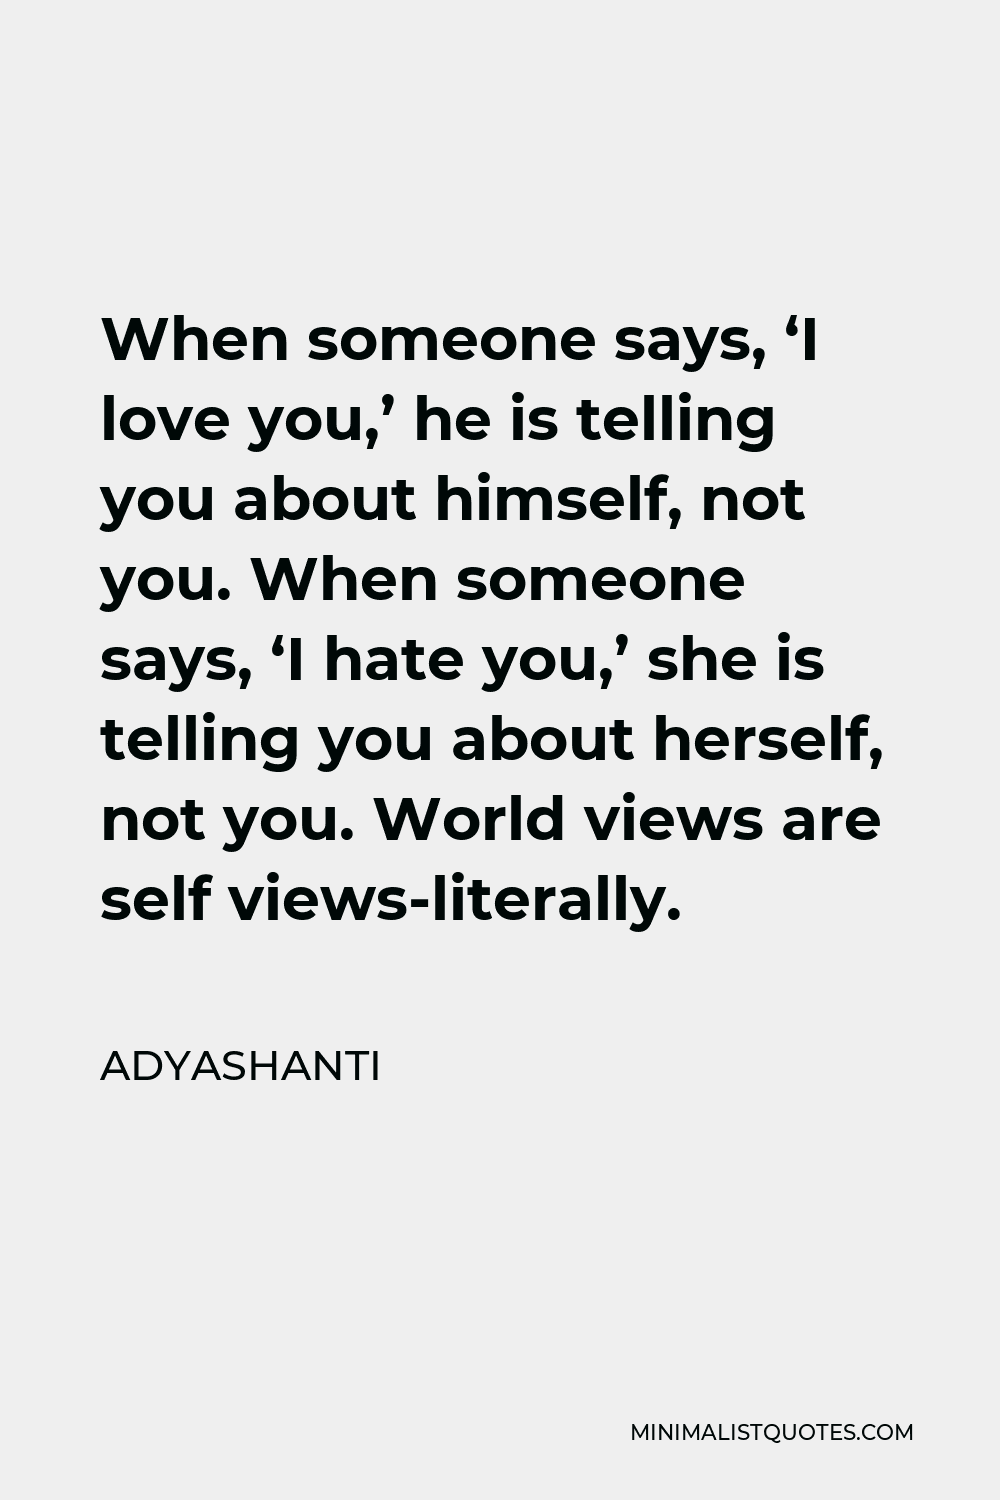 Adyashanti Quote - When someone says, ‘I love you,’ he is telling you about himself, not you. When someone says, ‘I hate you,’ she is telling you about herself, not you. World views are self views-literally.